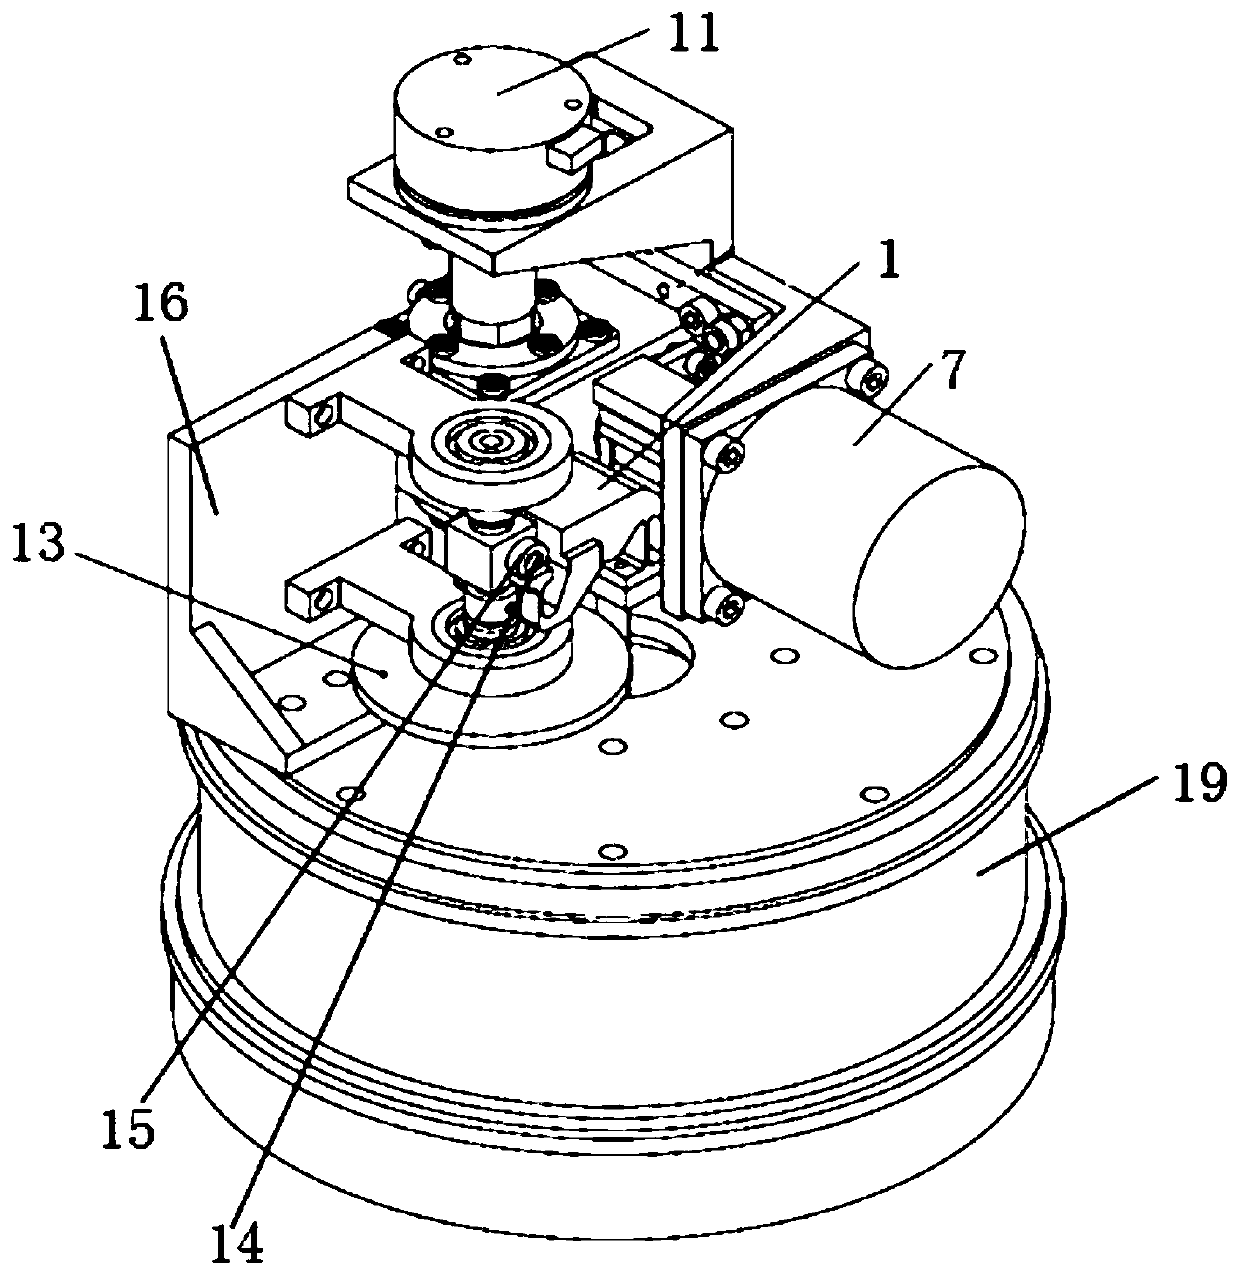 Precision adjusting mechanism and focusing device for spatial optical telescope